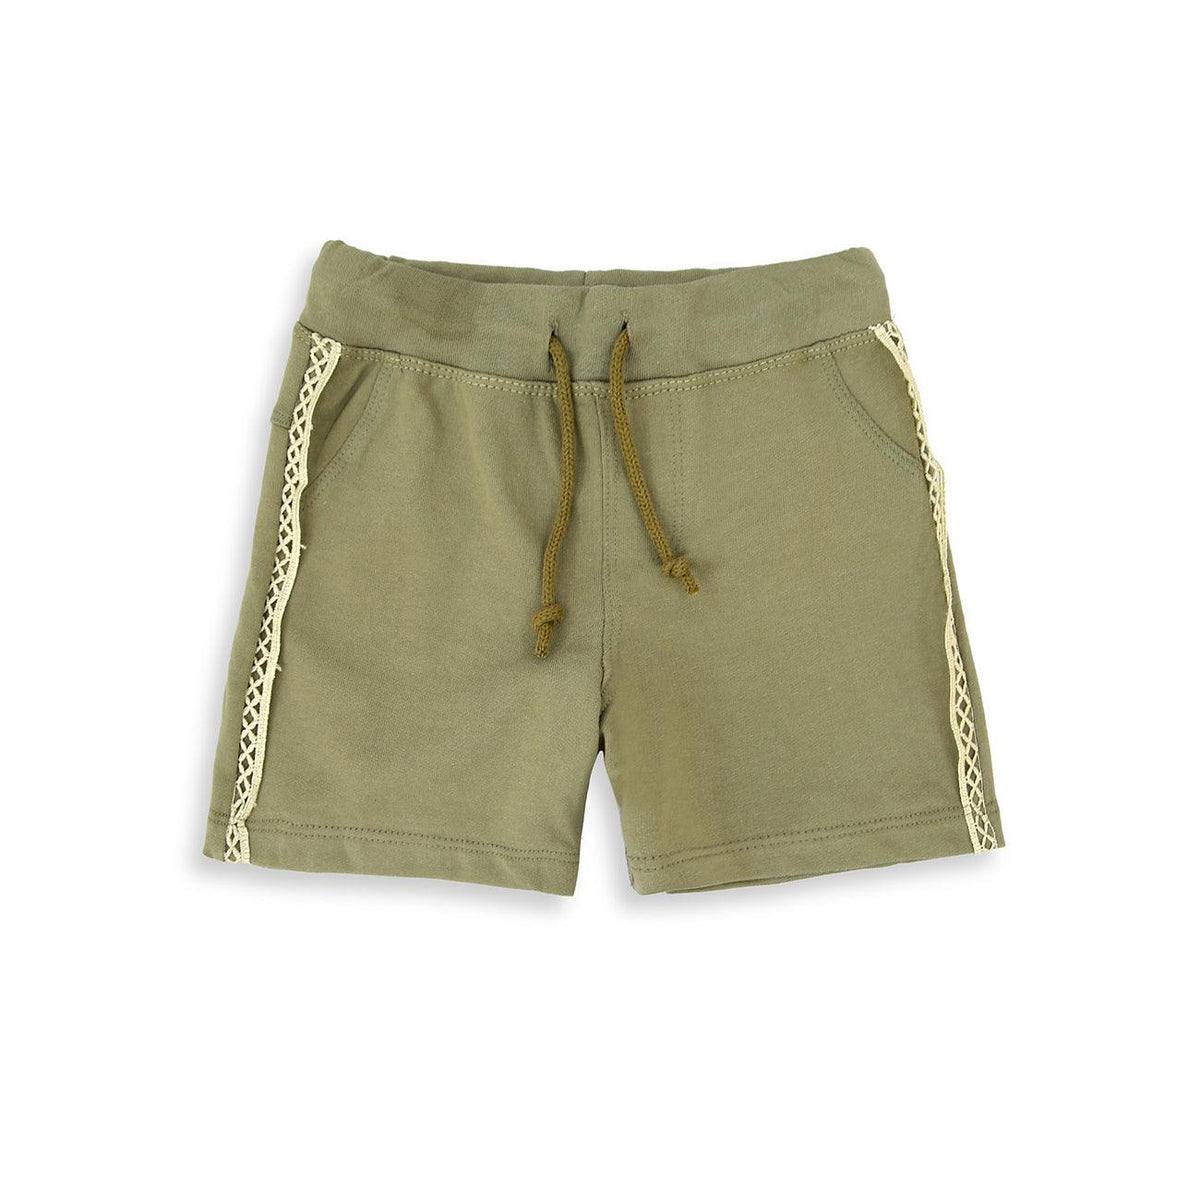 Premium Quality Lightweight and Soft Fashion Short For Girls - Brands River